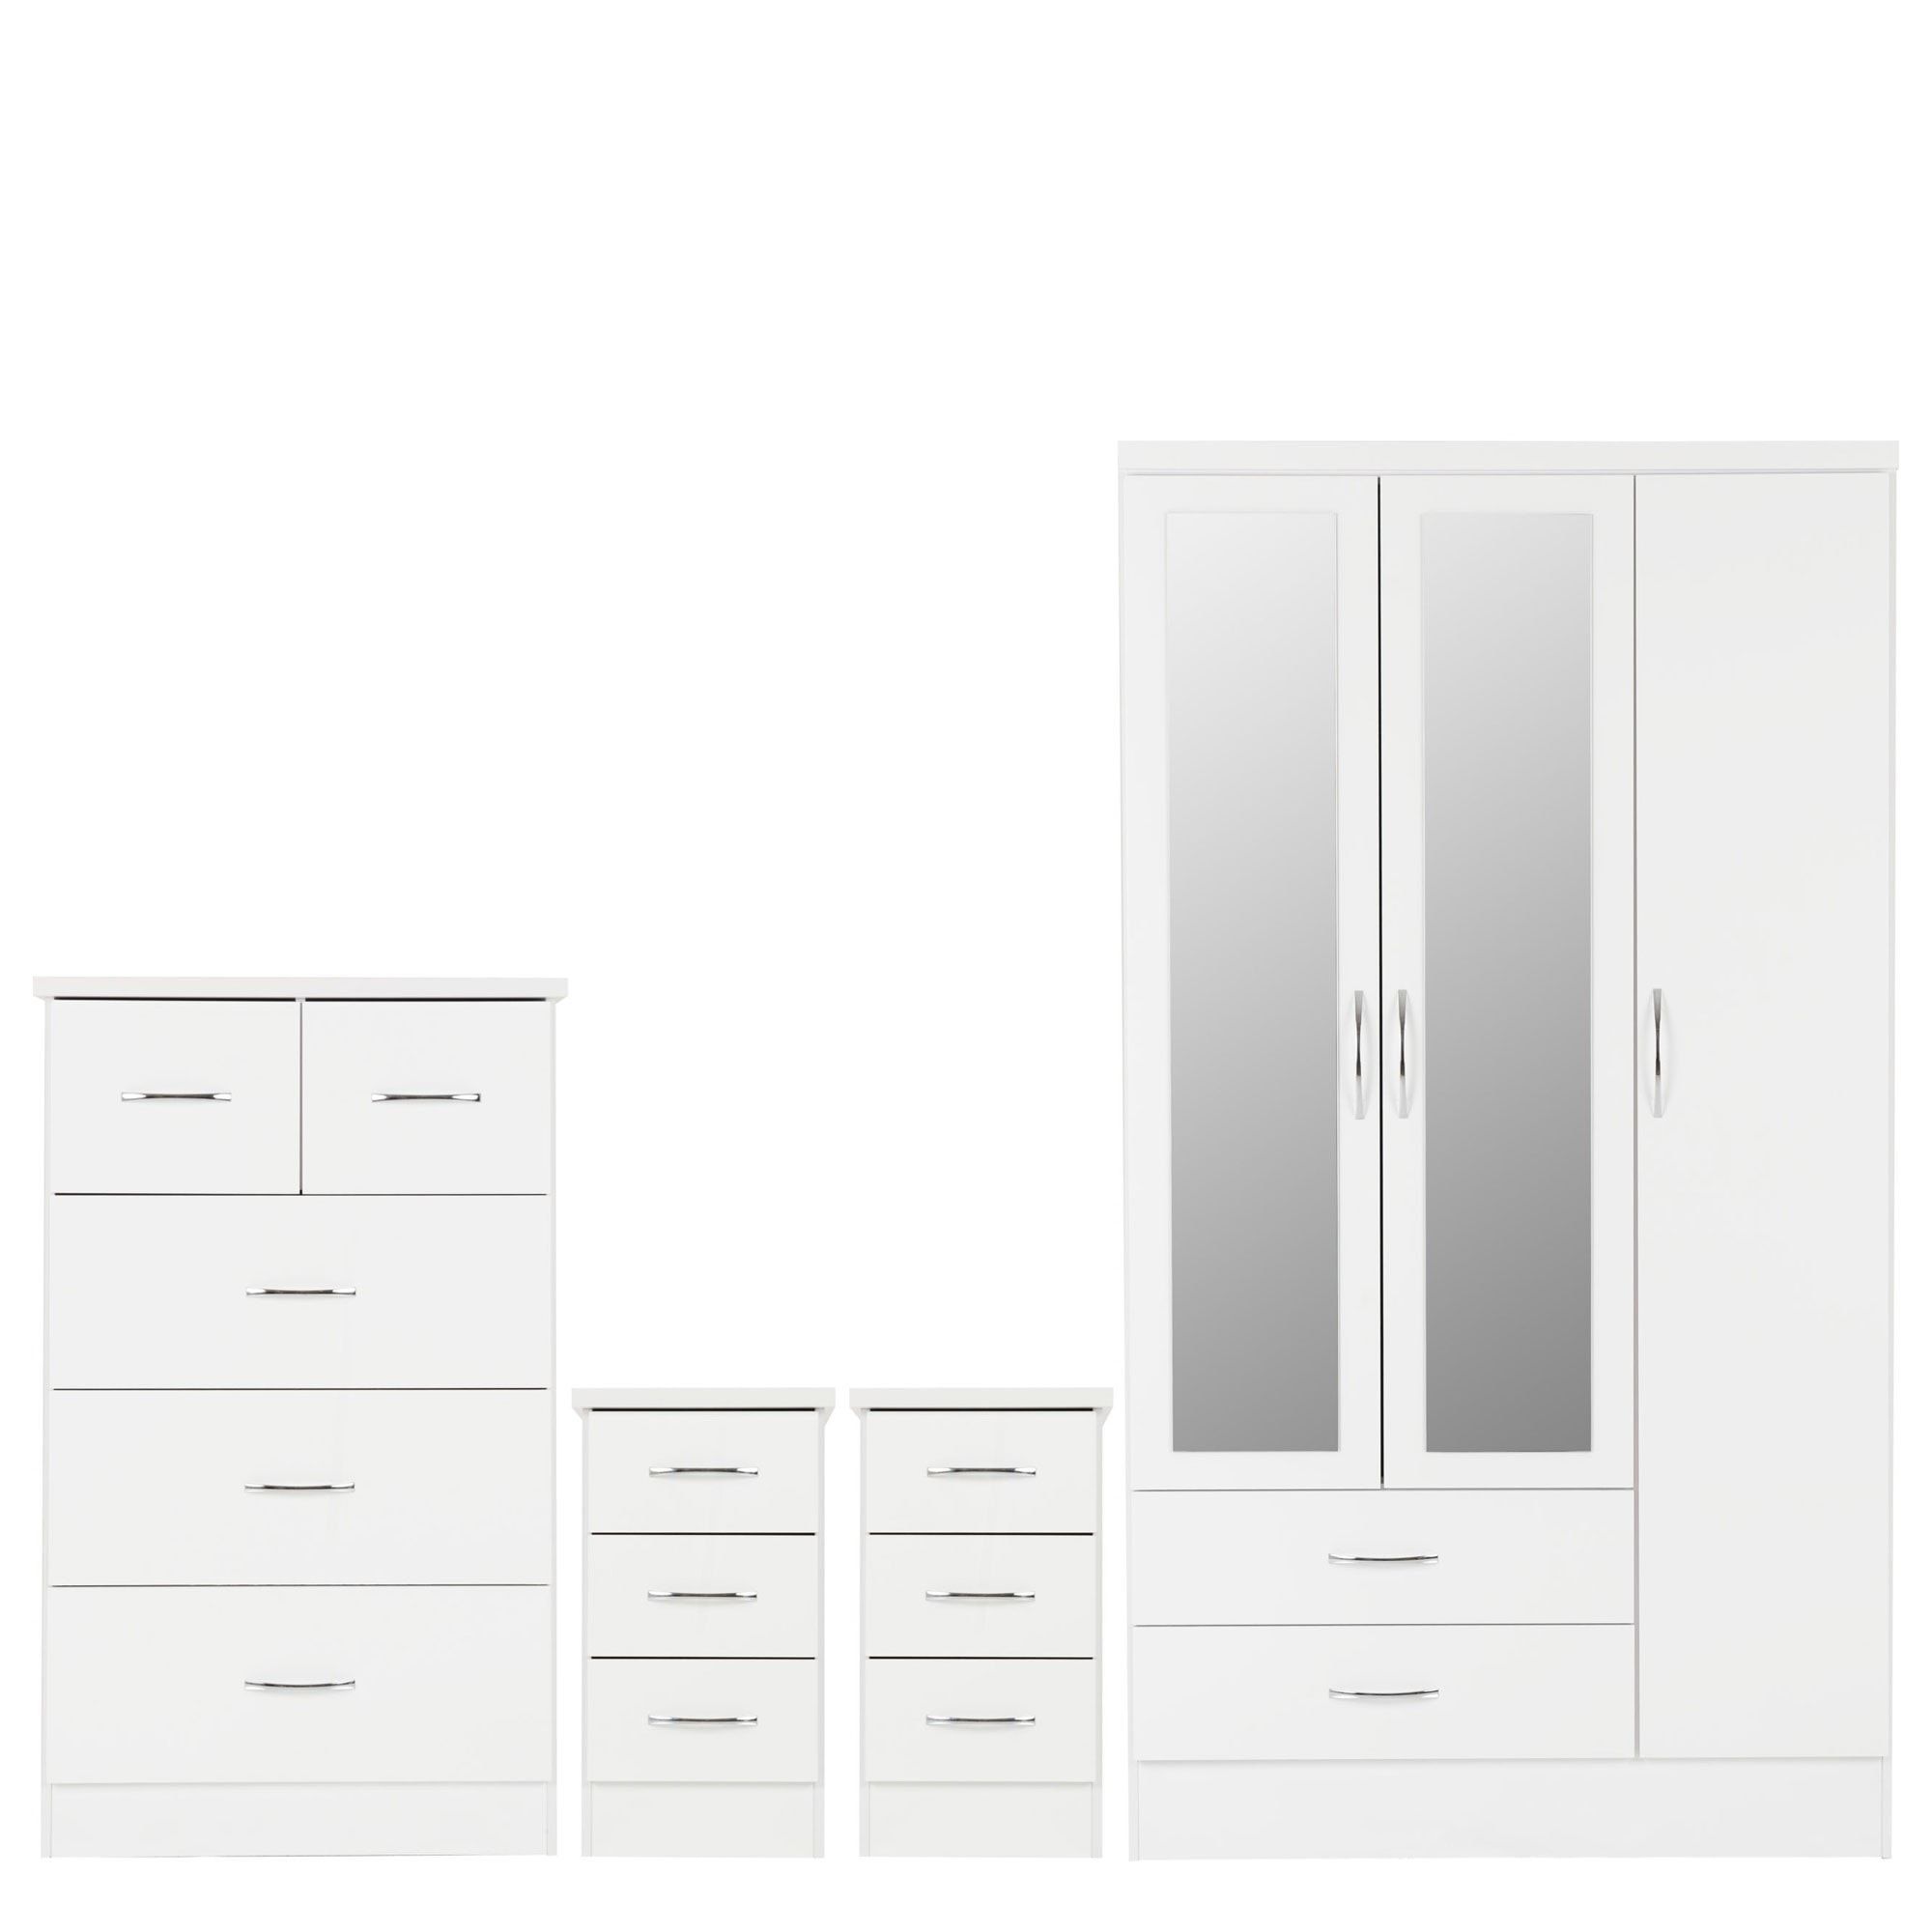 Nevada White Gloss 3 Door 2 Drawer Mirrored Wardrobe Bedroom Set Intended For Black And White Wardrobes Set (View 11 of 15)